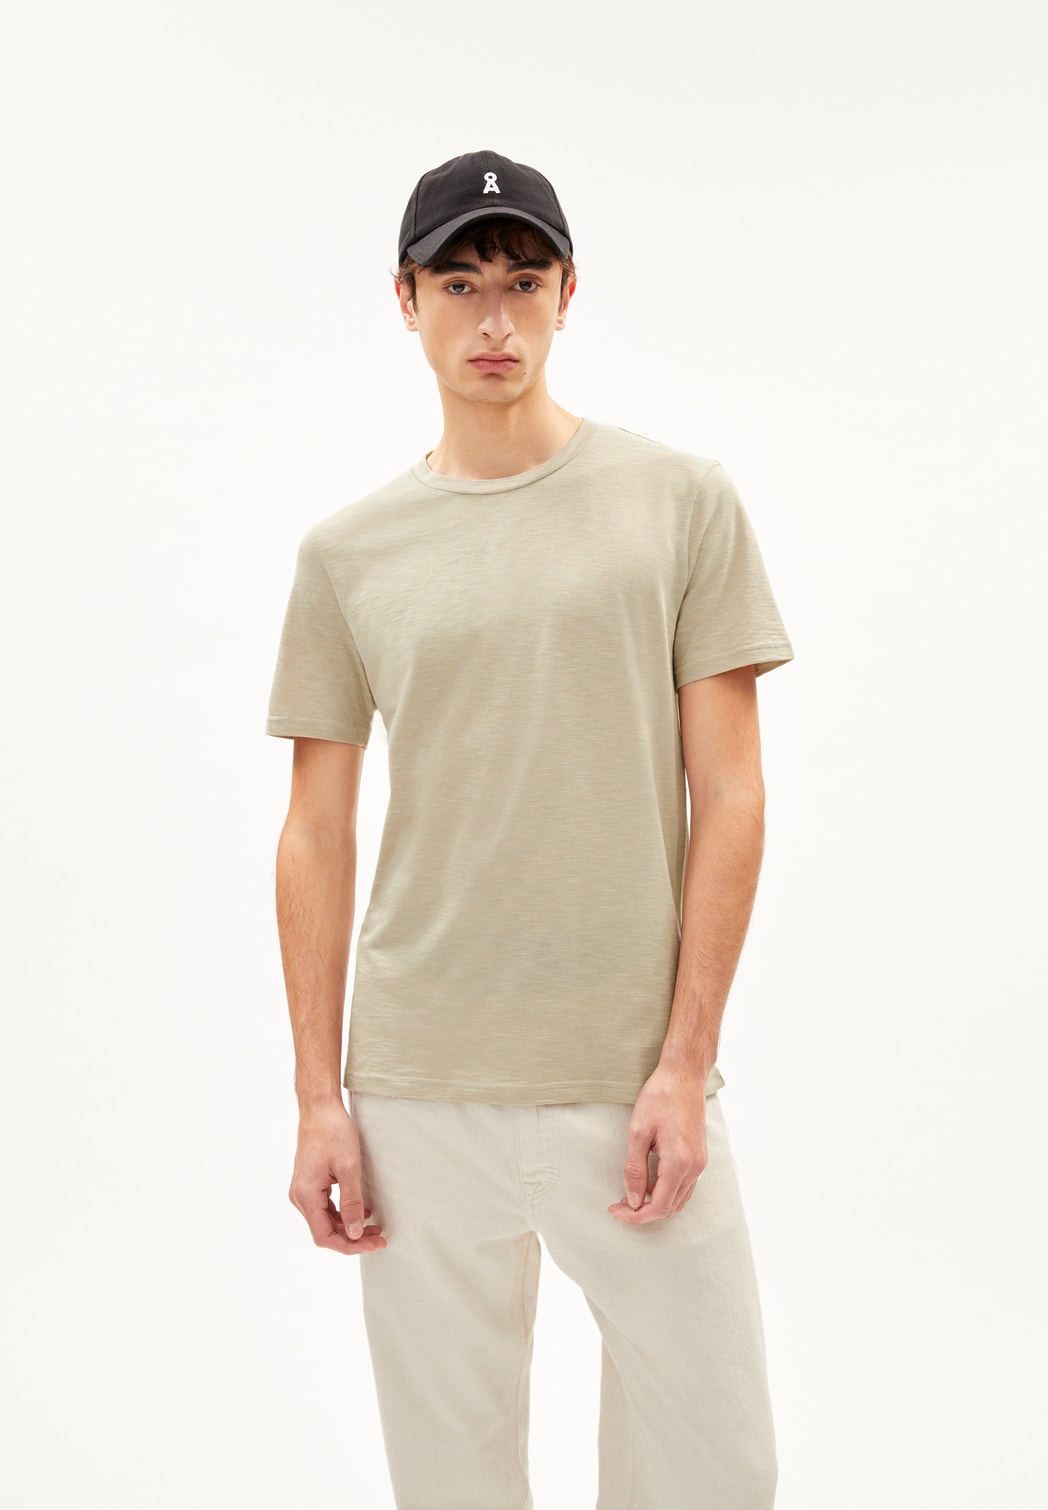 T-Shirt JAAMES STRUCTURE sand stone/light sand stone